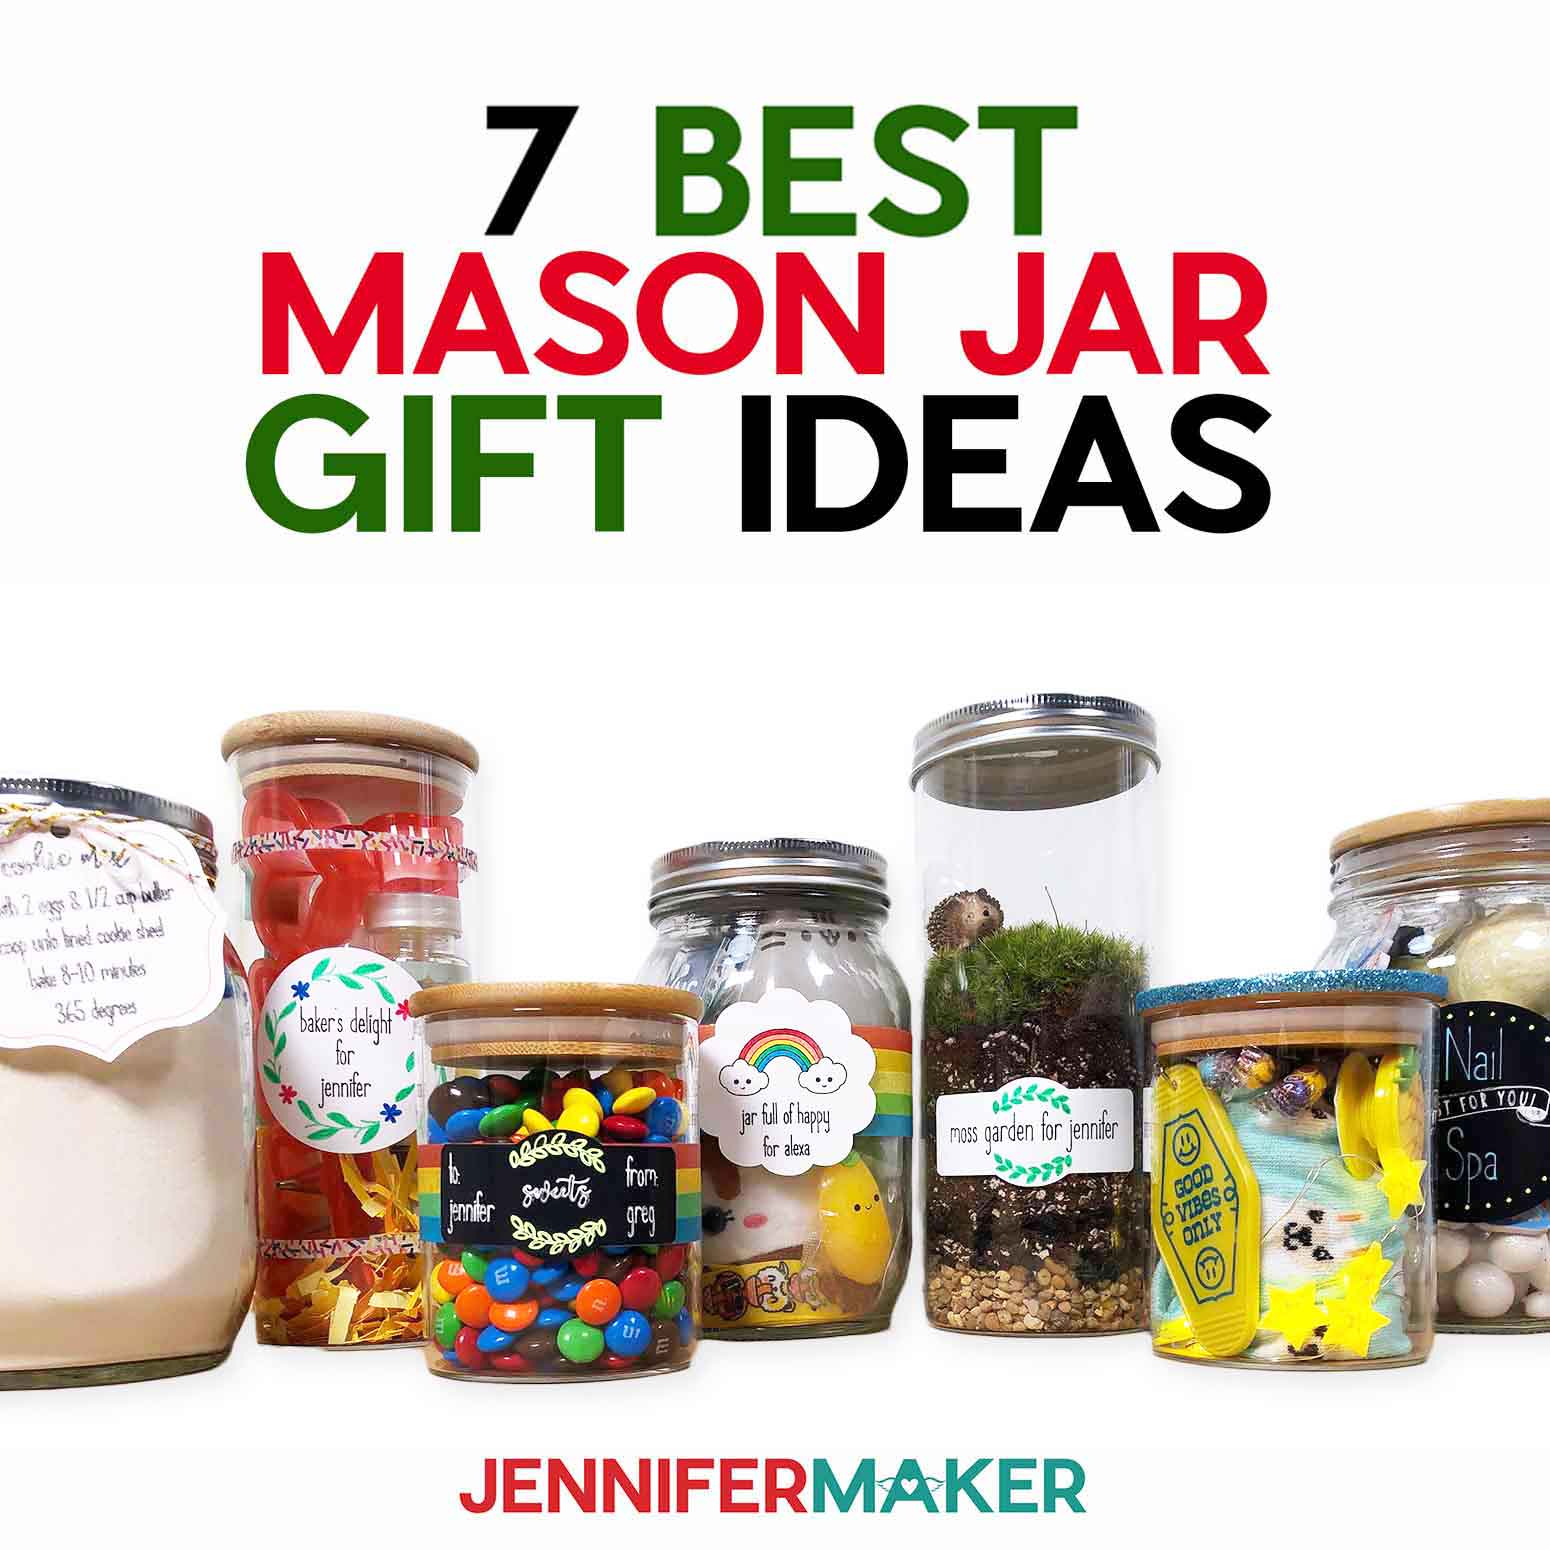 7 mason jar gift ideas featuring themed, labeled containers for bakers, candy, a moss garden, beauty night, and toys.